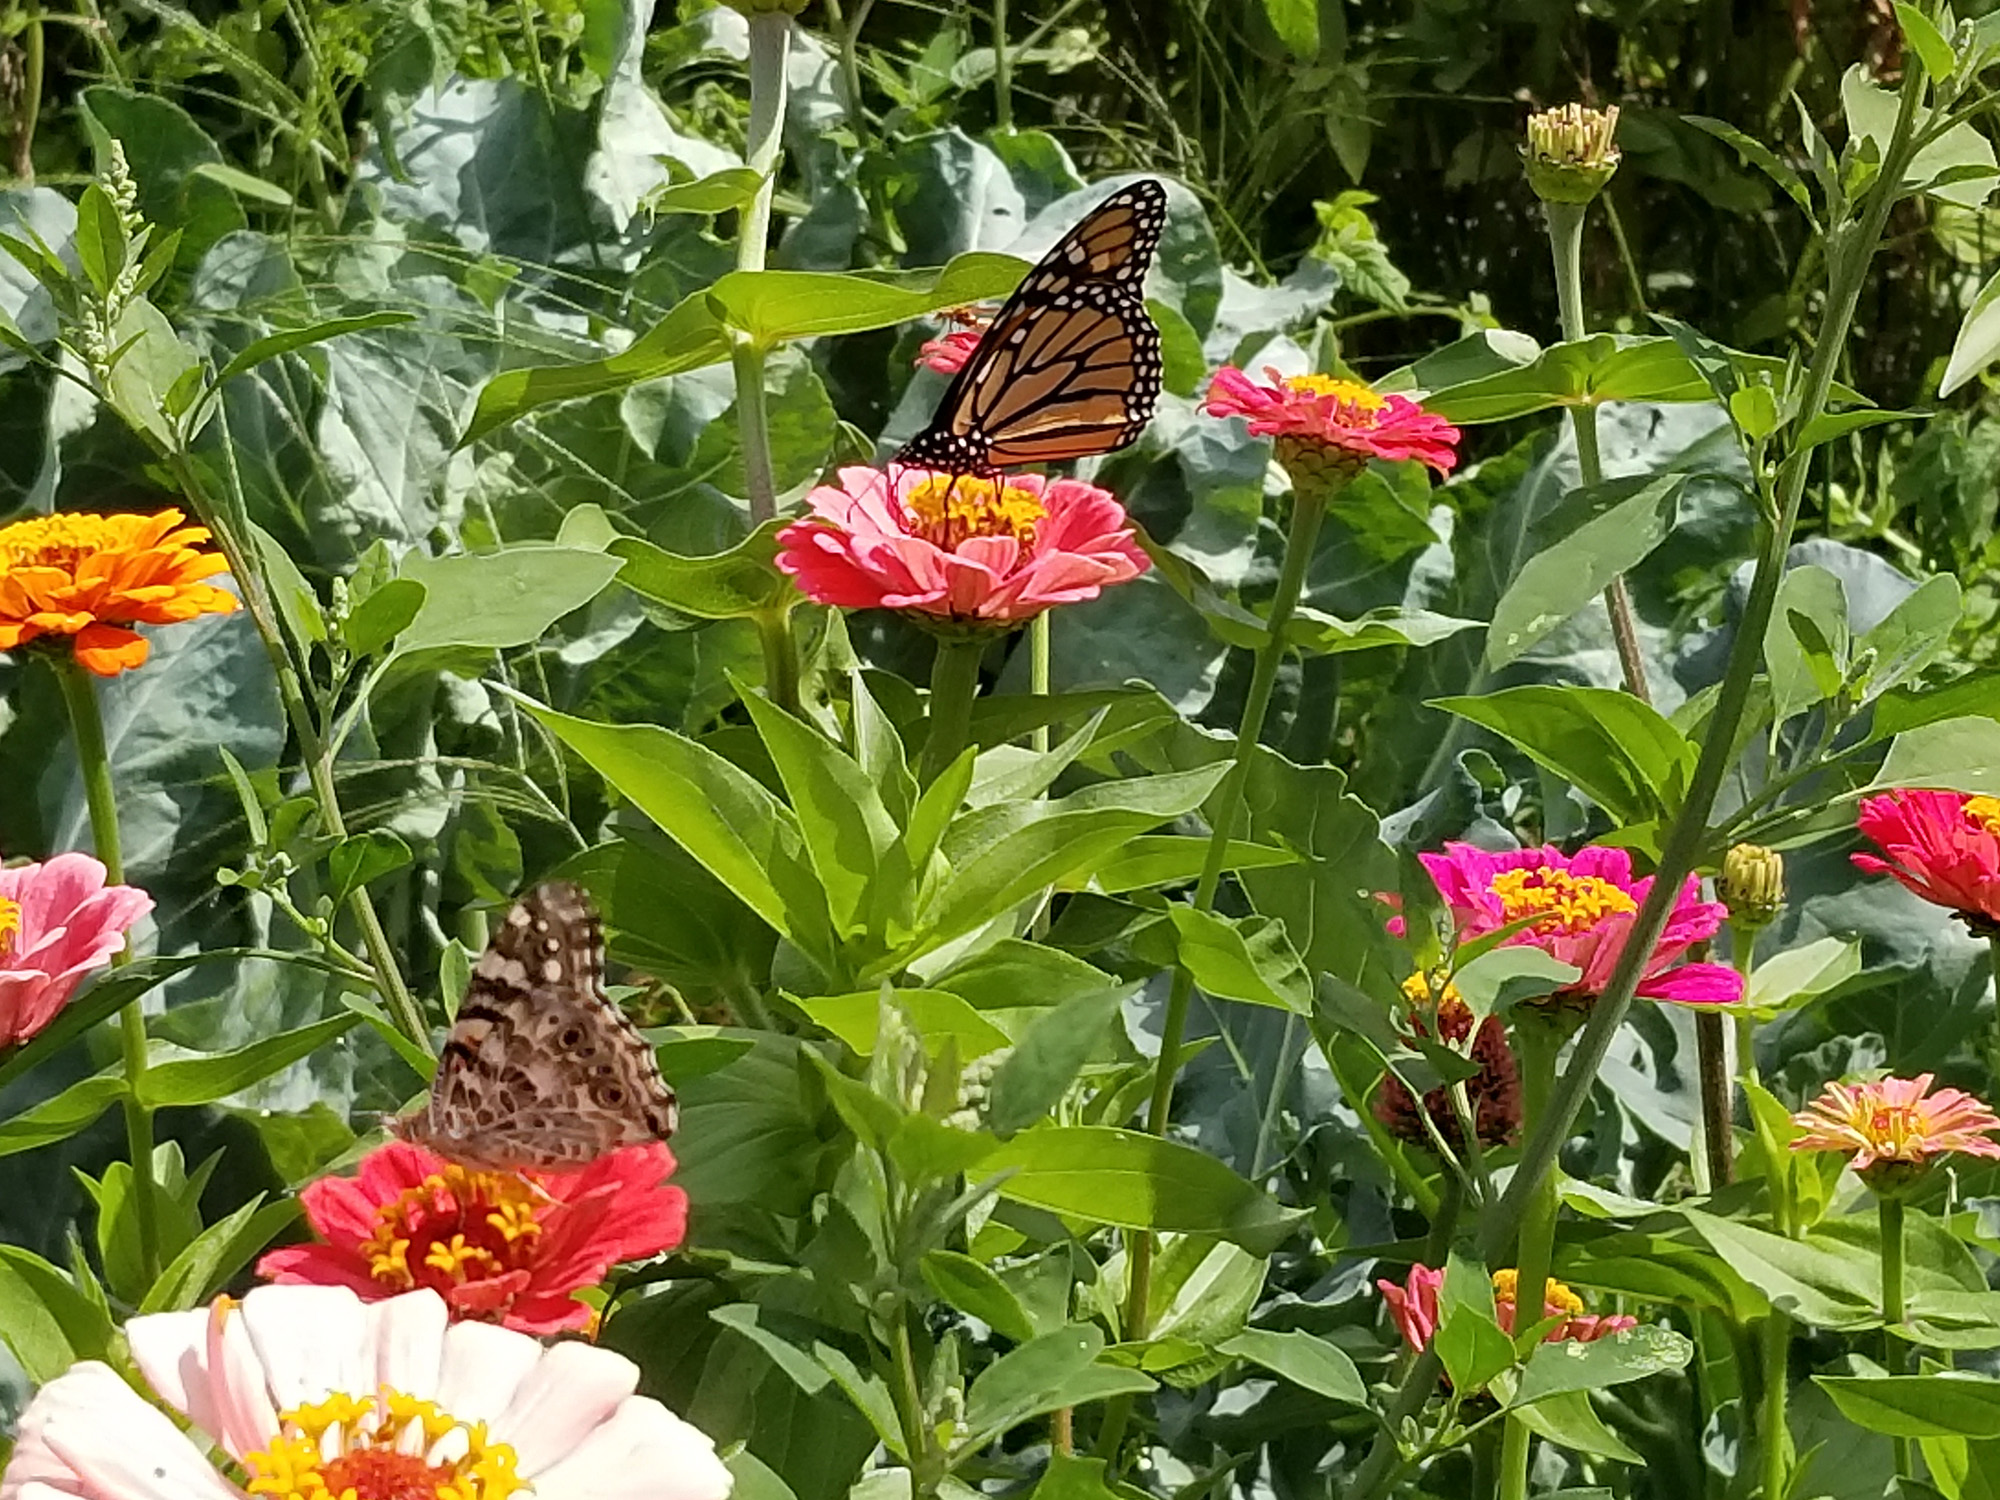 Monarch butterfly collecting nectar from a pink flower